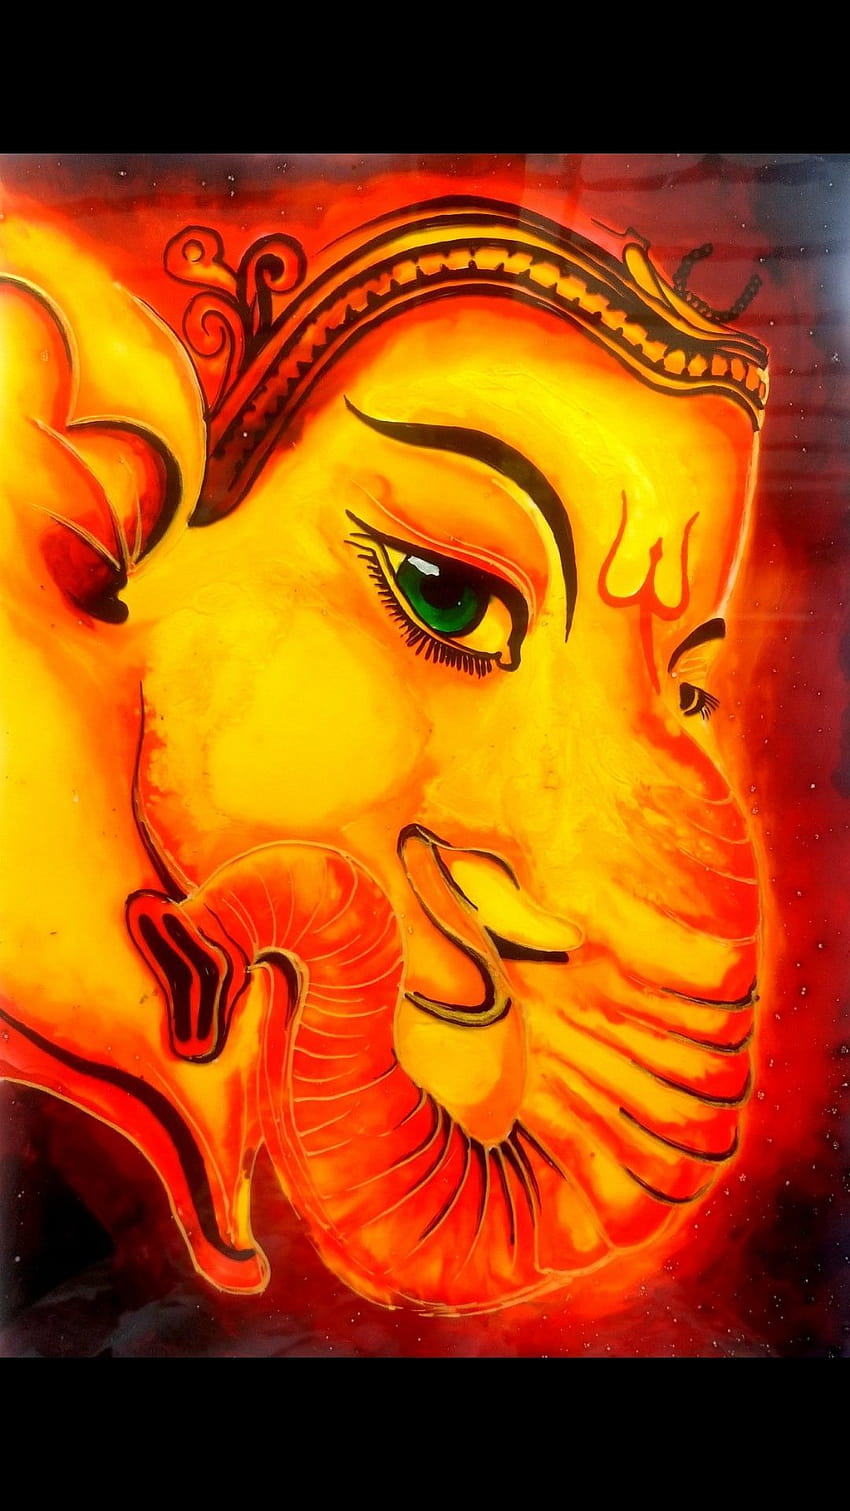 Lord Ganesha Abstract Painting  Acrylic On Canvas  Exotic India Art